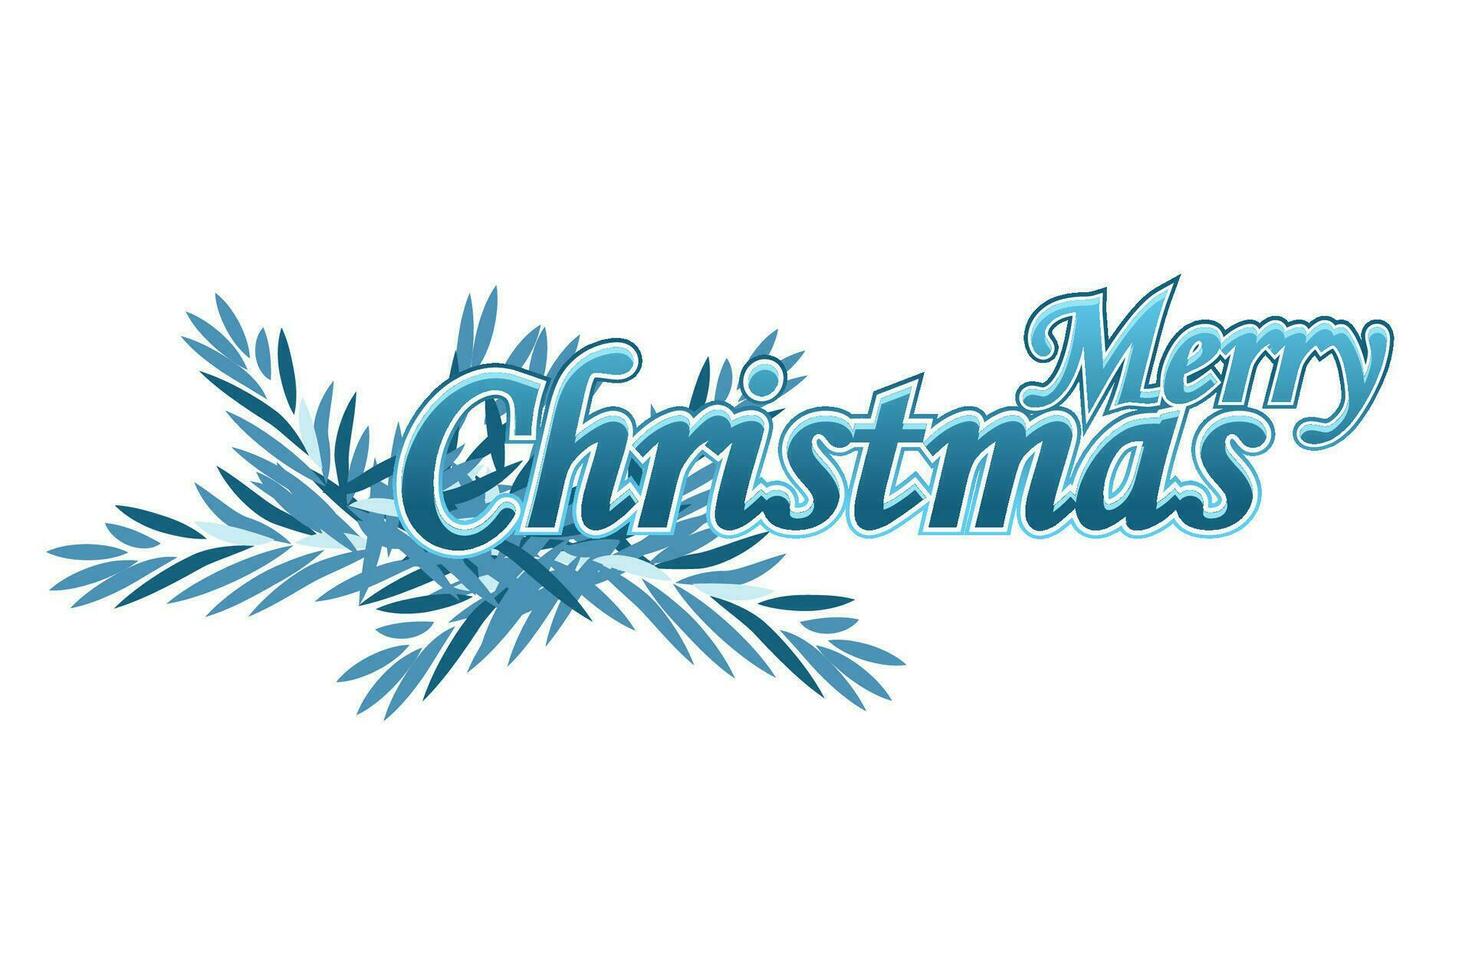 Merry Christmas blue text is isolated on a white background. Vector holiday illustration element